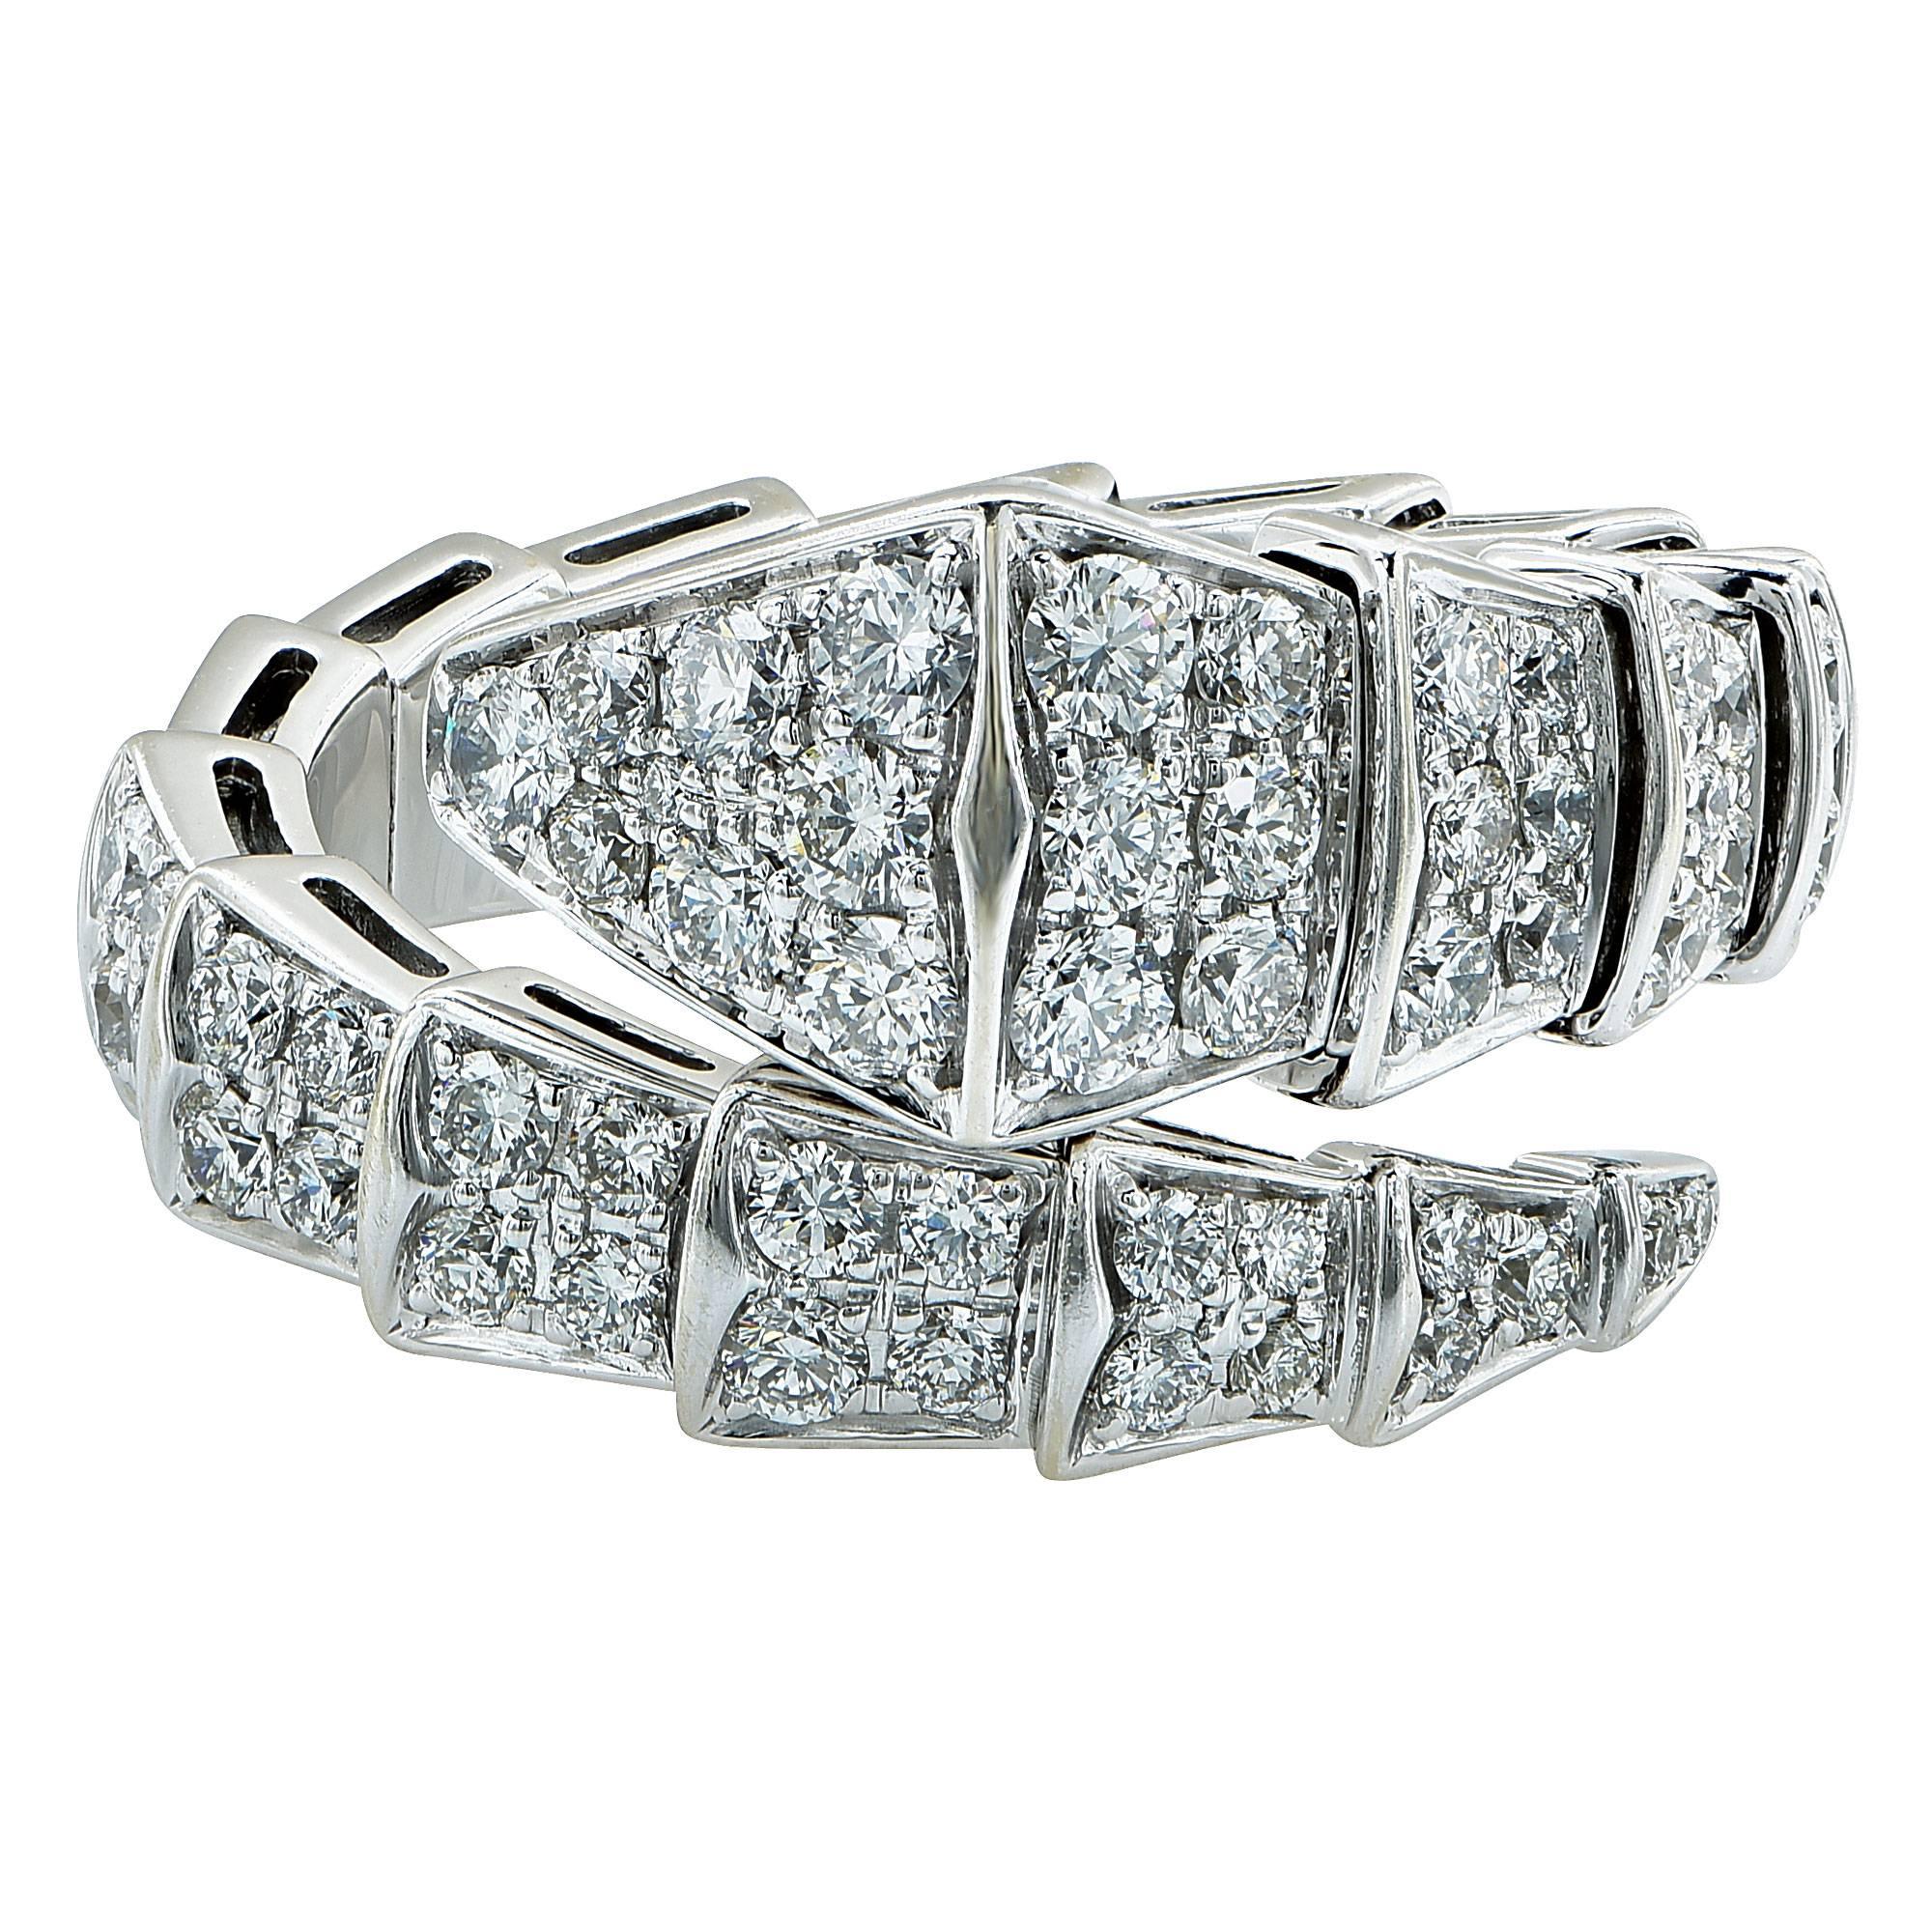 18k white gold Bvlgari Serpenti ring featuring 82 round brilliant cut diamonds weighing approximately 1.8cts total F color VS clarity. This ring comes with original box as well as receipt of service from Bvlgari.

Ring size: L (US size 7 to